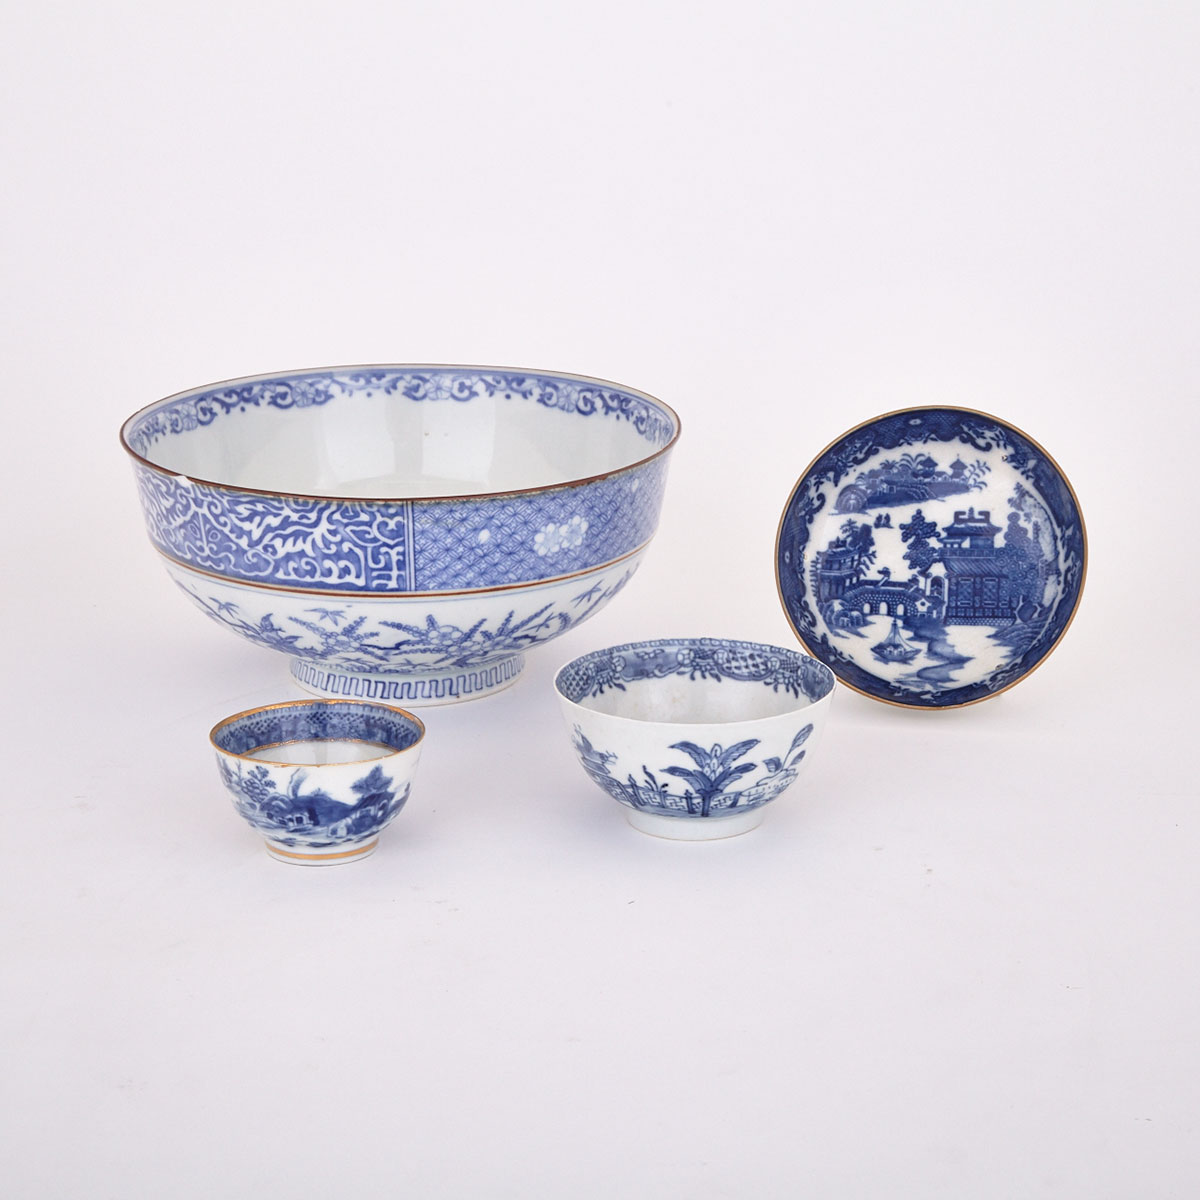 Blue and White Export Bowls, 19th Century